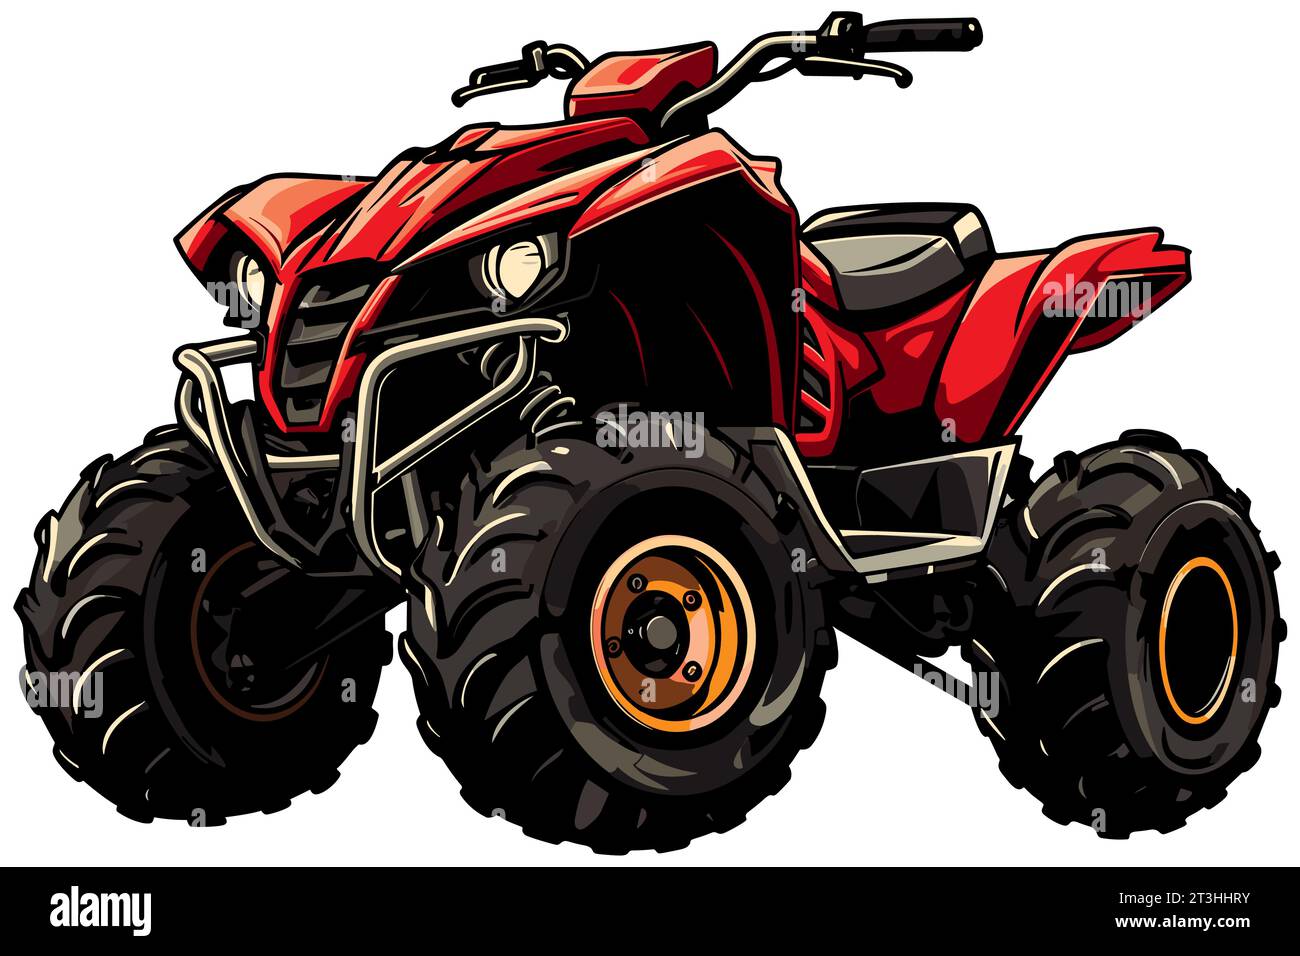 Vibrant illustration of red all-terrain vehicle, posed against white background, ready for rugged adventures. Stock Vector